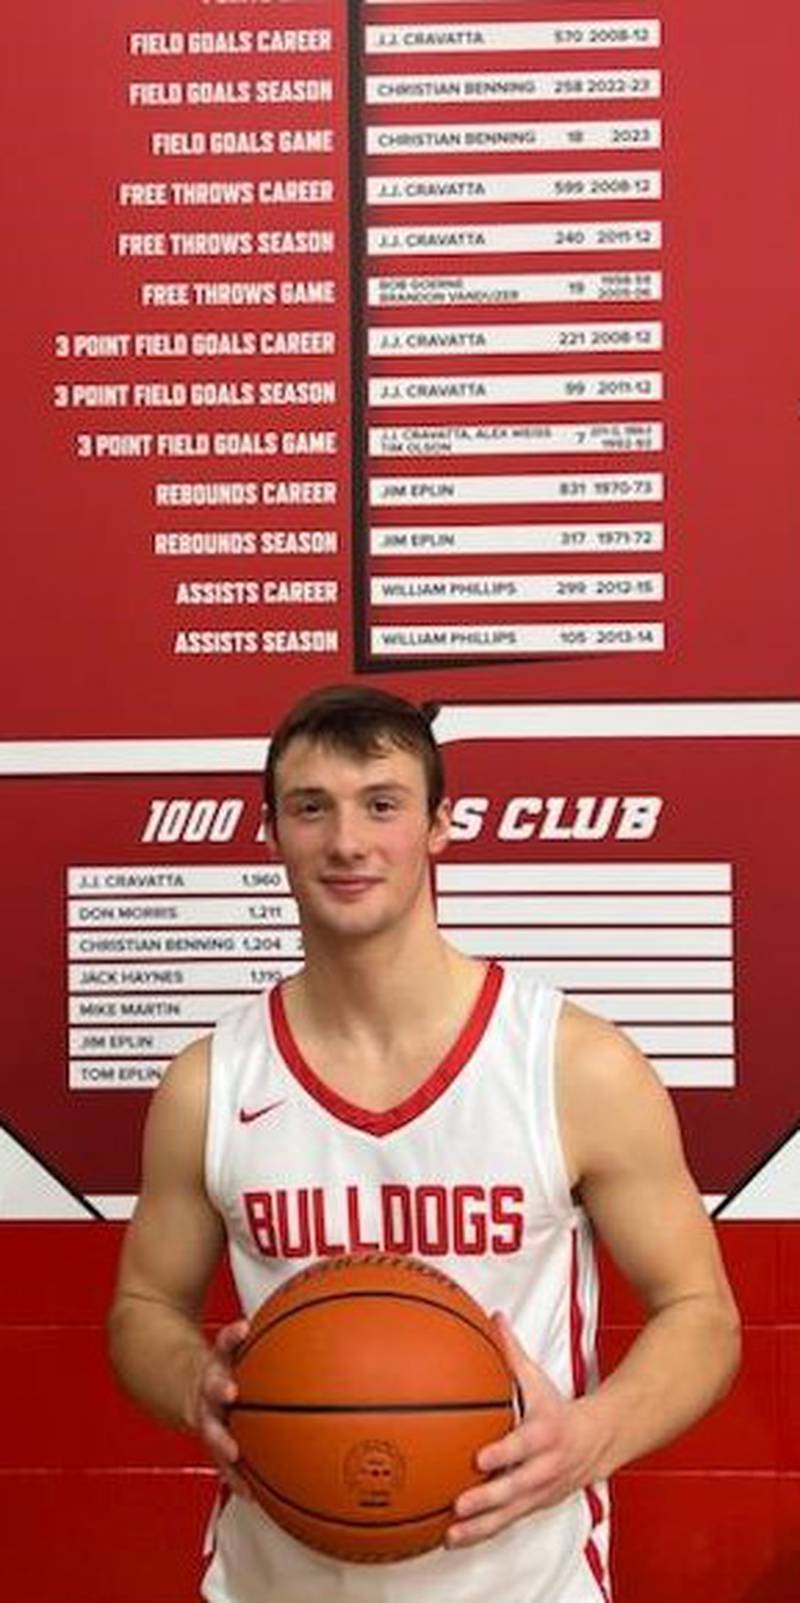 Streator senior Christian Benning scored a game-high 20 points, including the game-winning hoop with 3.3 seconds left, while also becoming the program's all-time leader in made field goals in the Bulldogs' 53-52 victory over Morris at Pops Dale Gymnasium on Saturday night.